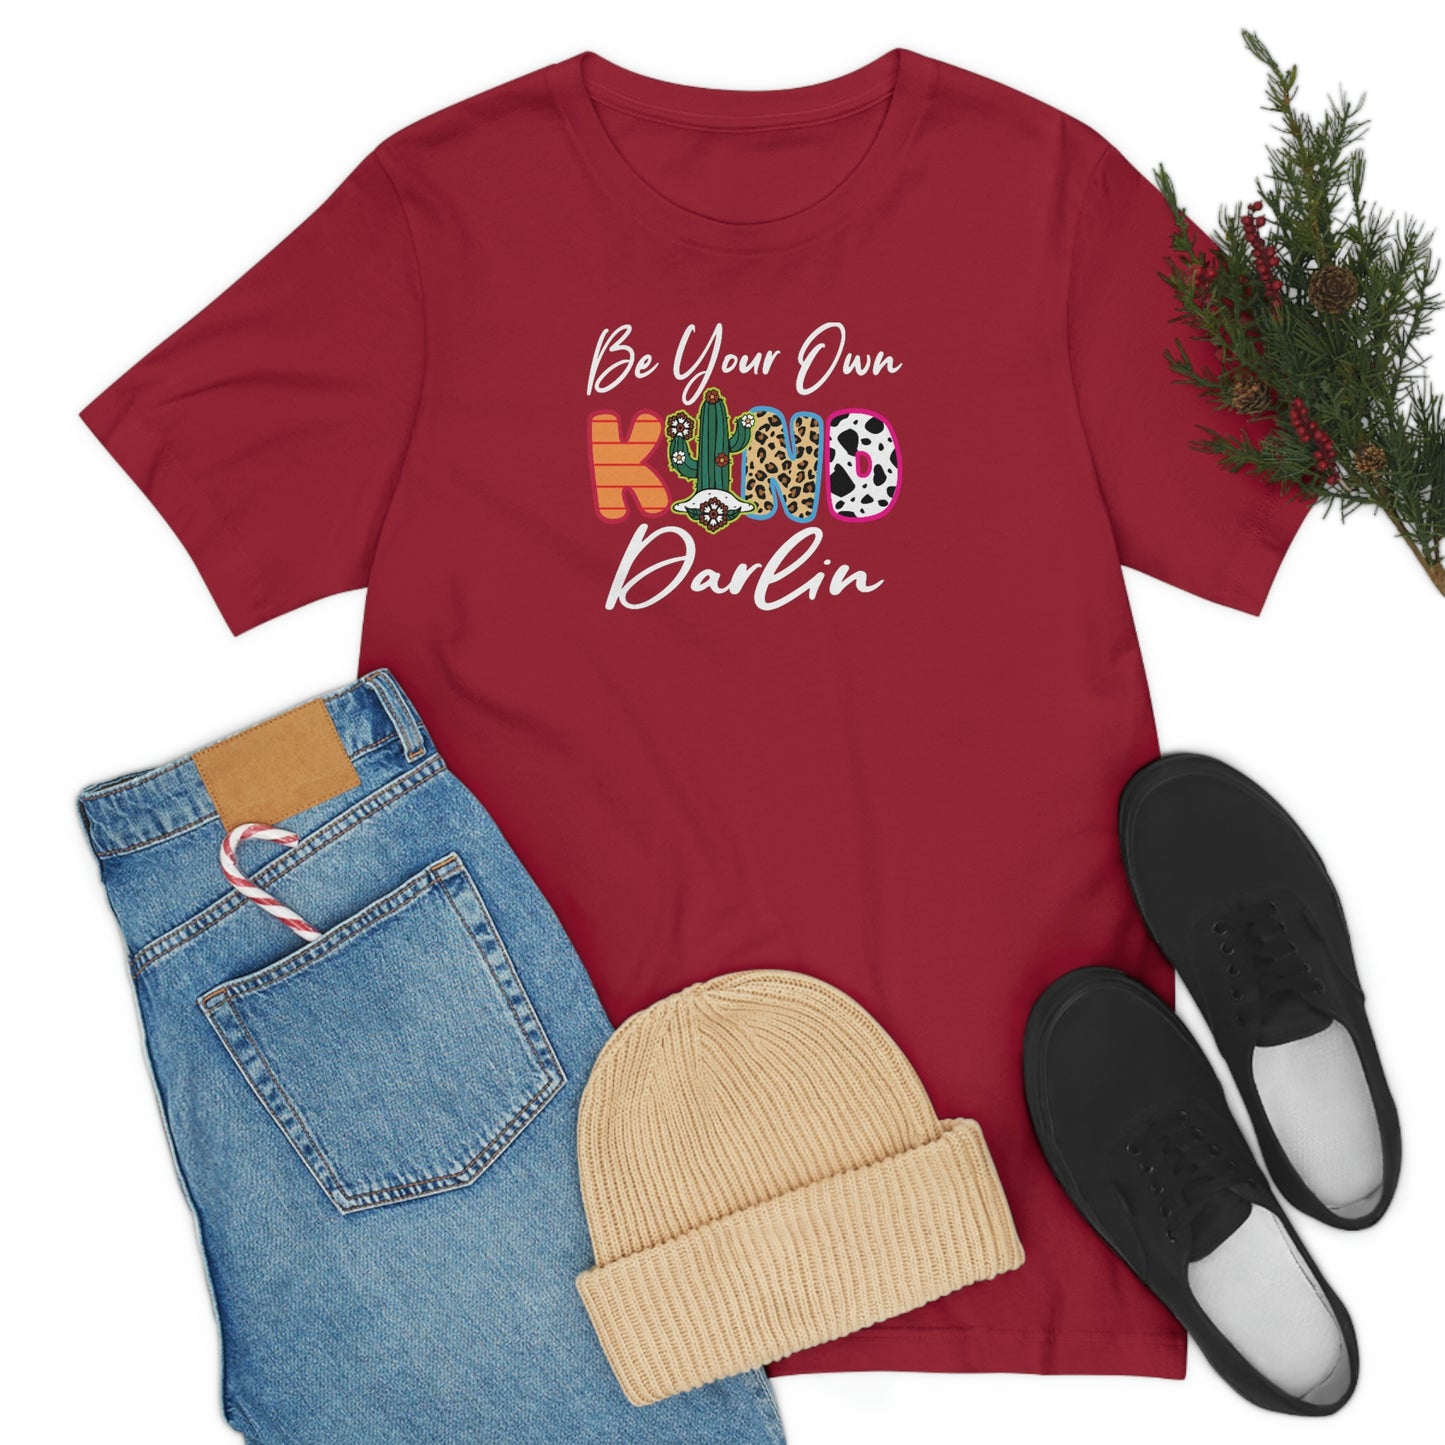 Be Your Own Kind Darling Shirt